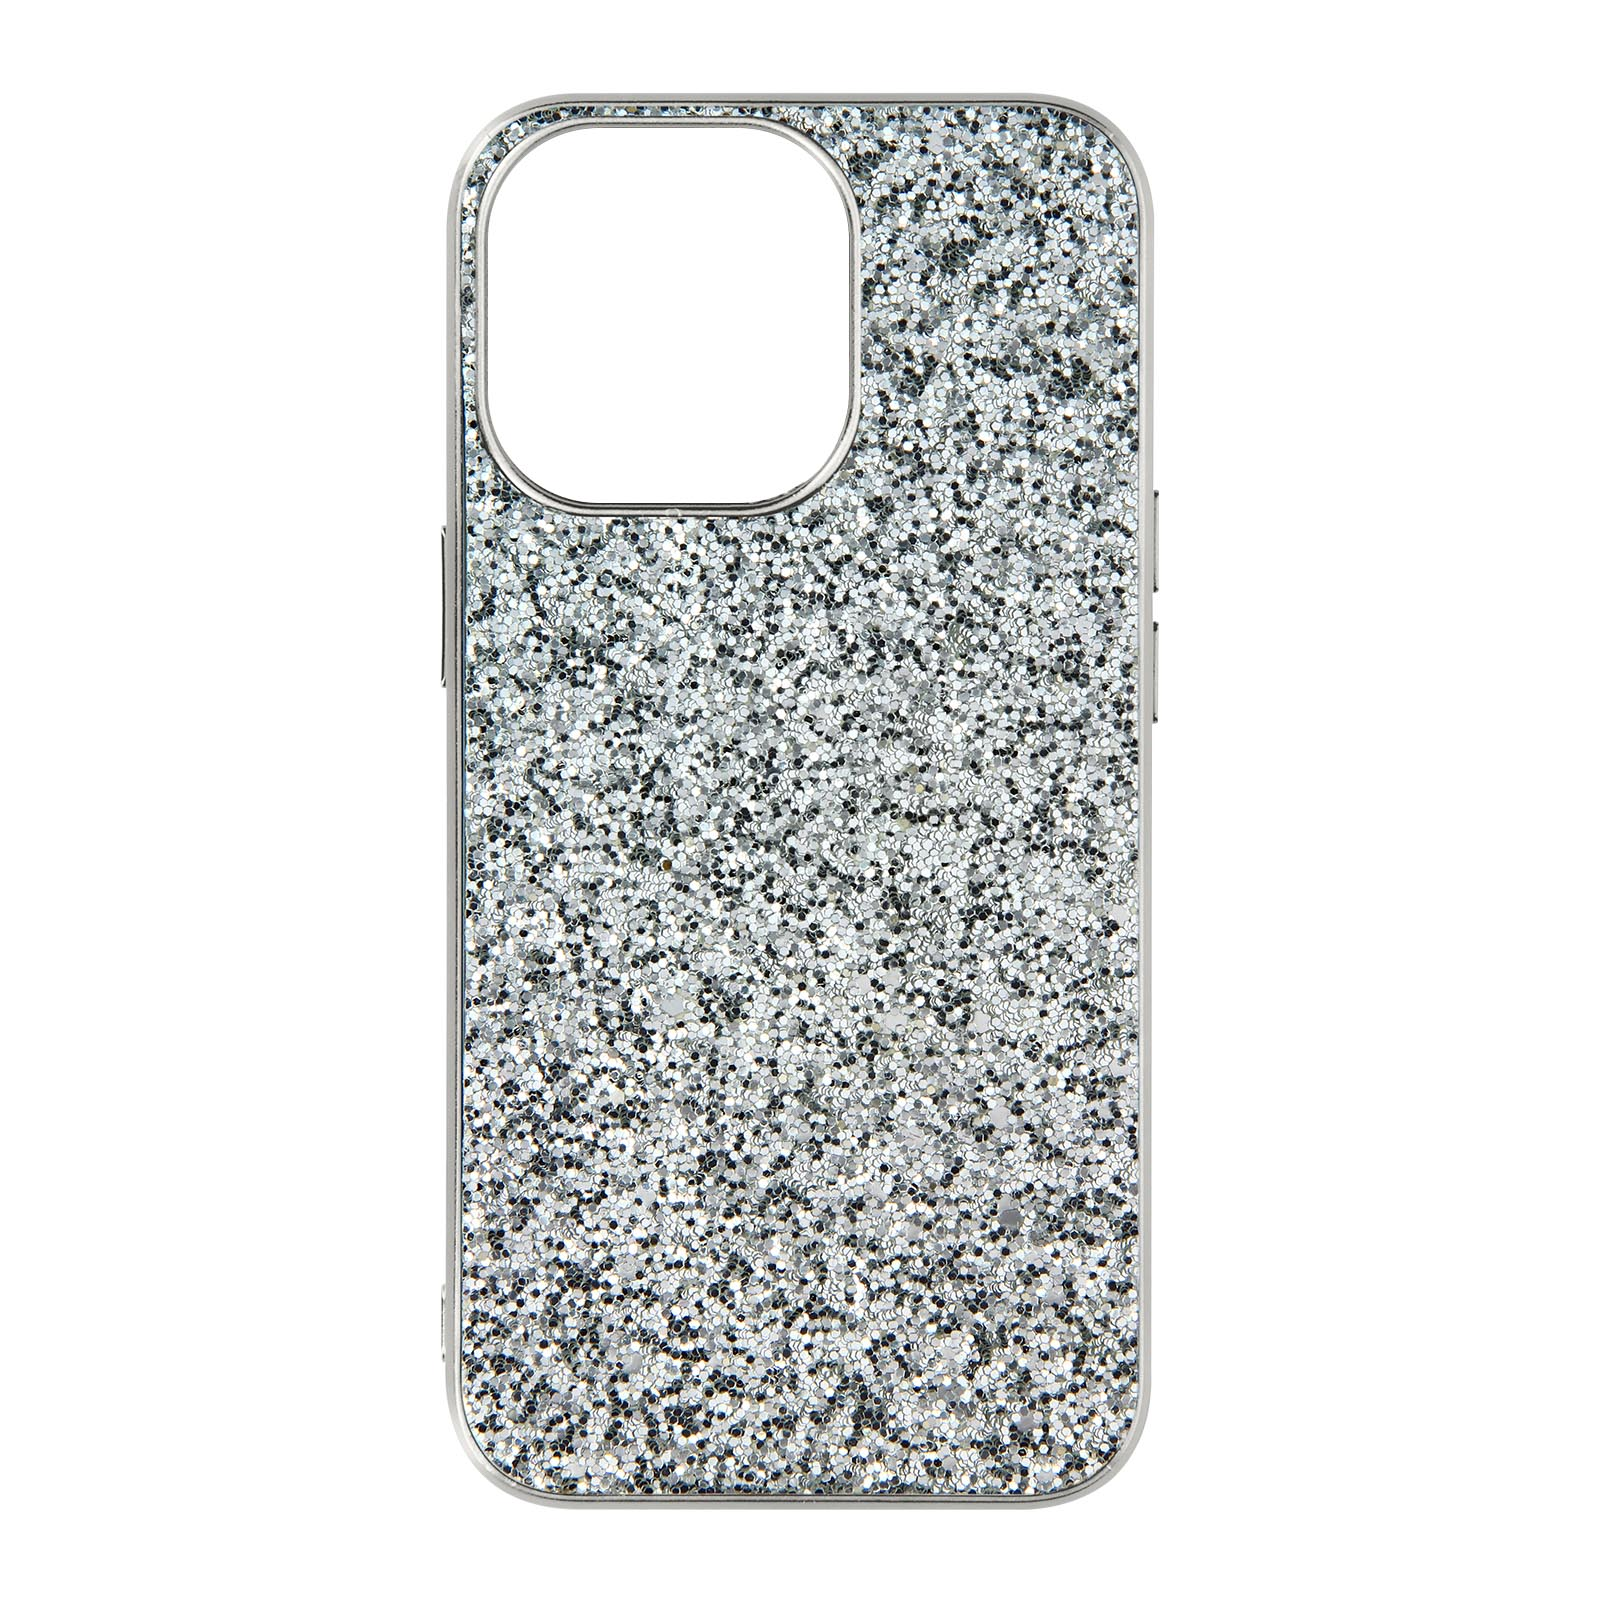 Pro AVIZAR iPhone Apple, Max, Series, Powder Silber 13 Backcover,